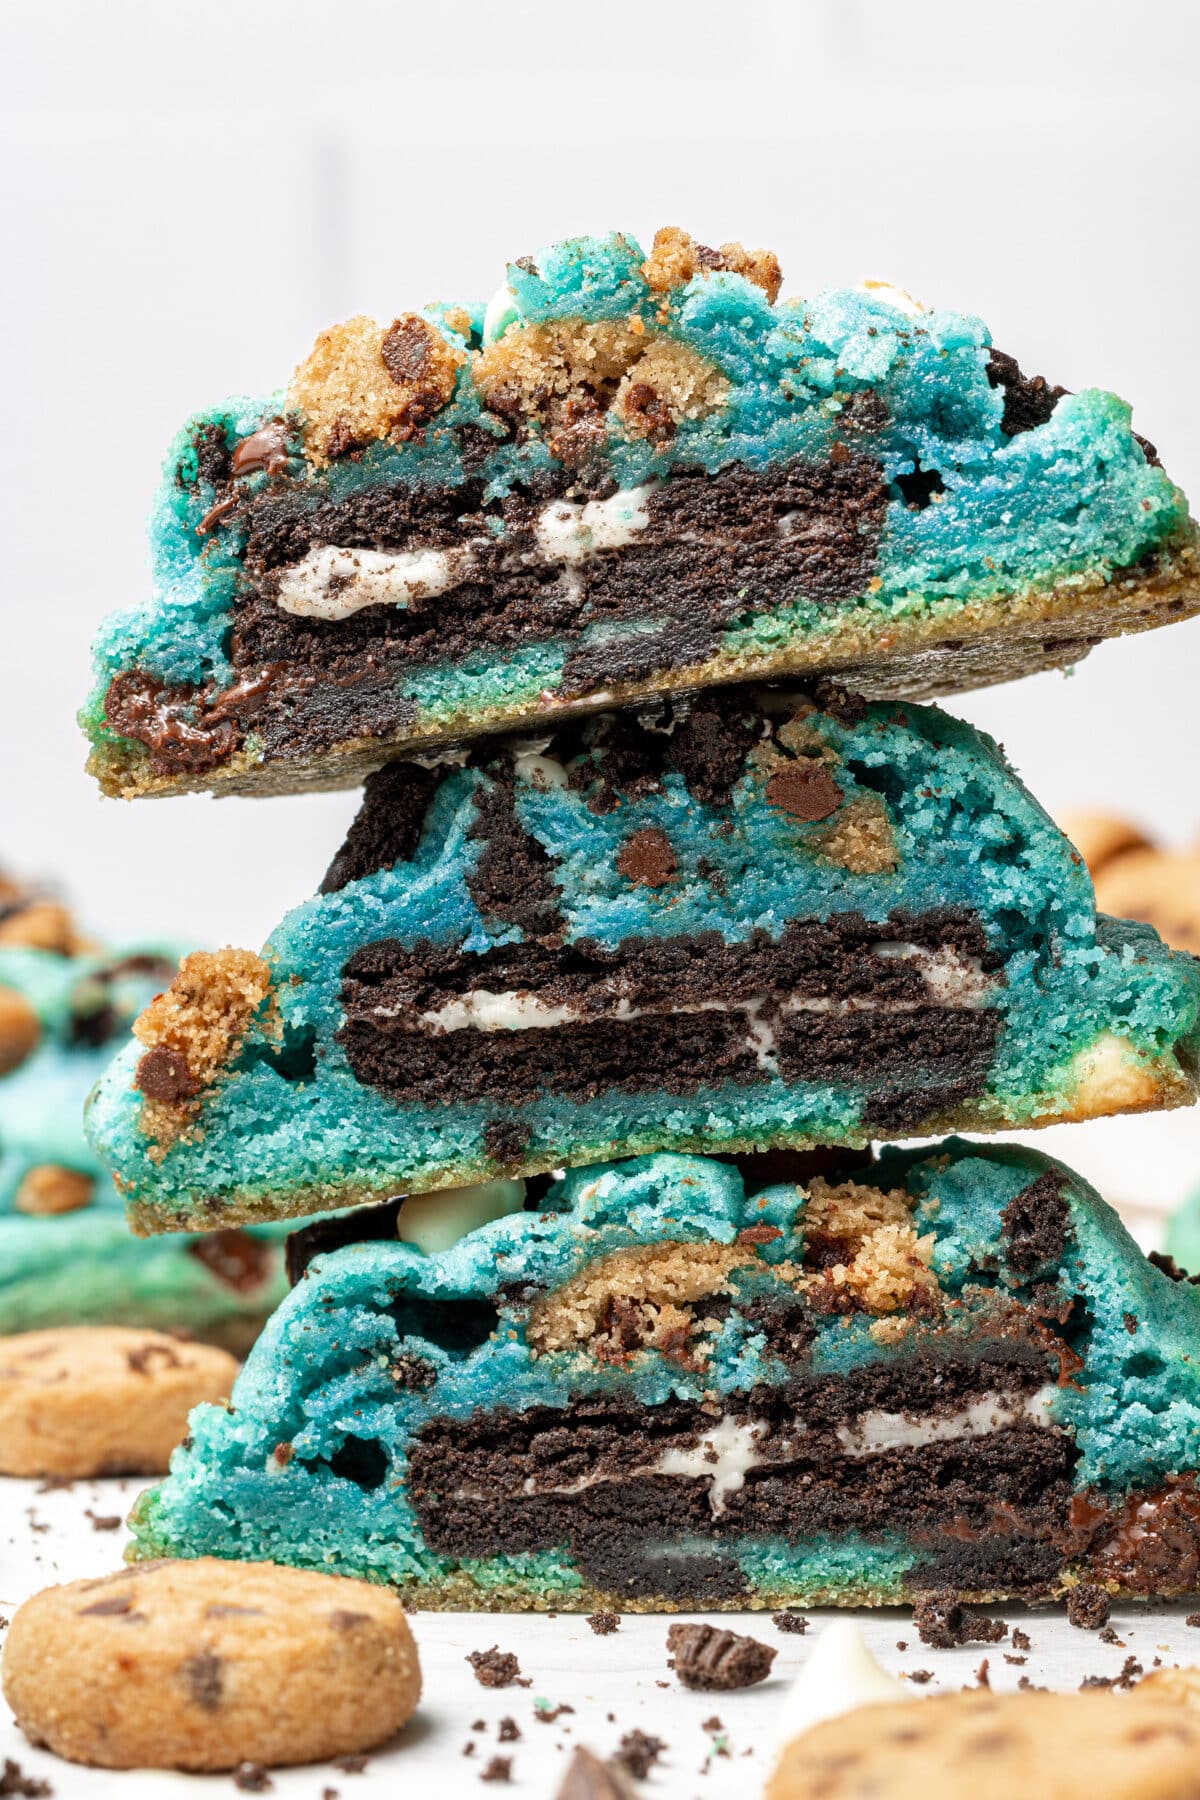 Cookie monster cookies cut in half and stacked mini cookies scattered around